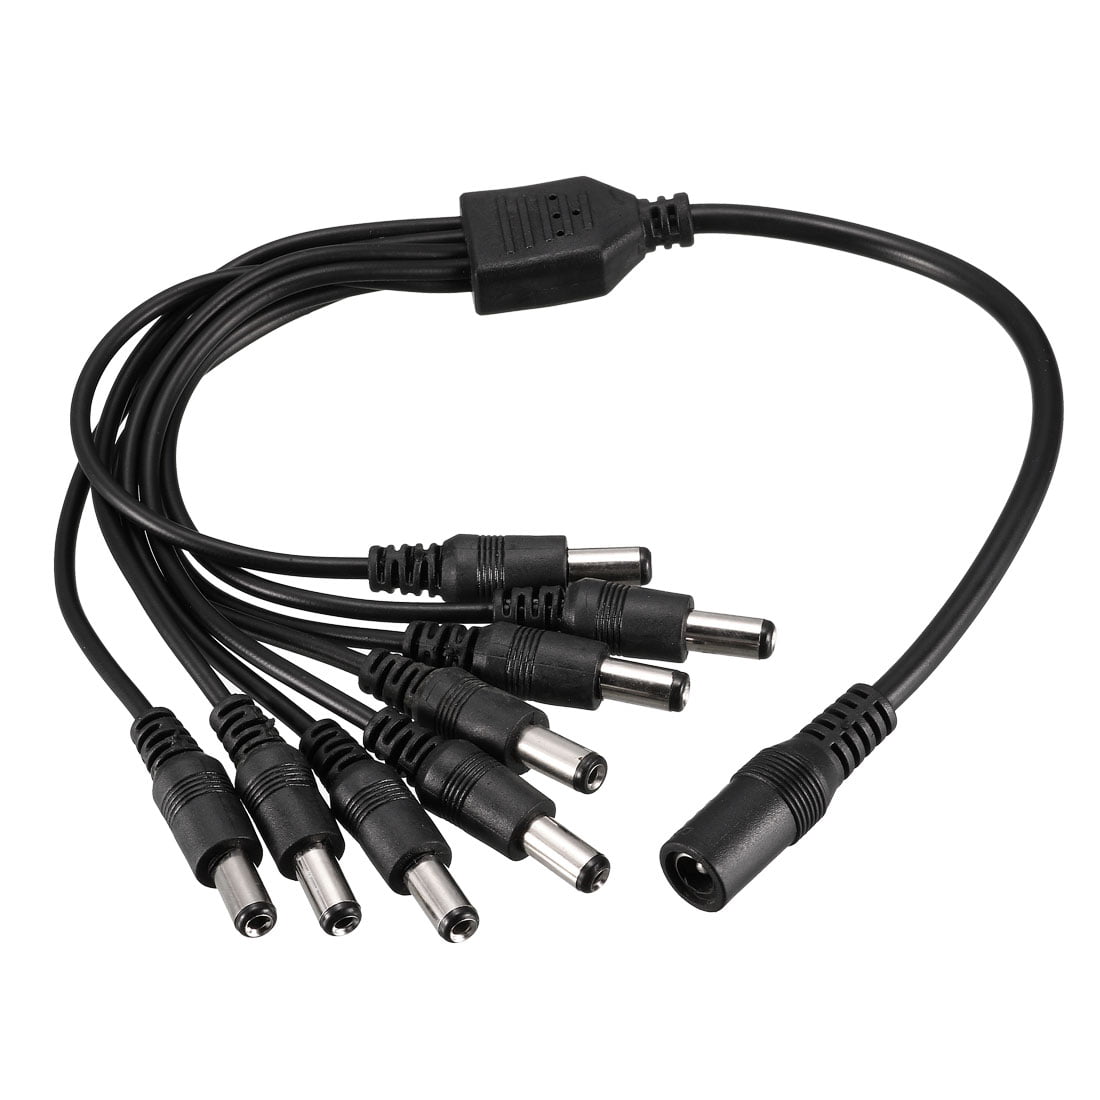 Pack of 5 InstallerCCTV 2.1mm X 5.5mm Dc Power Cable Female to Female Couplers 